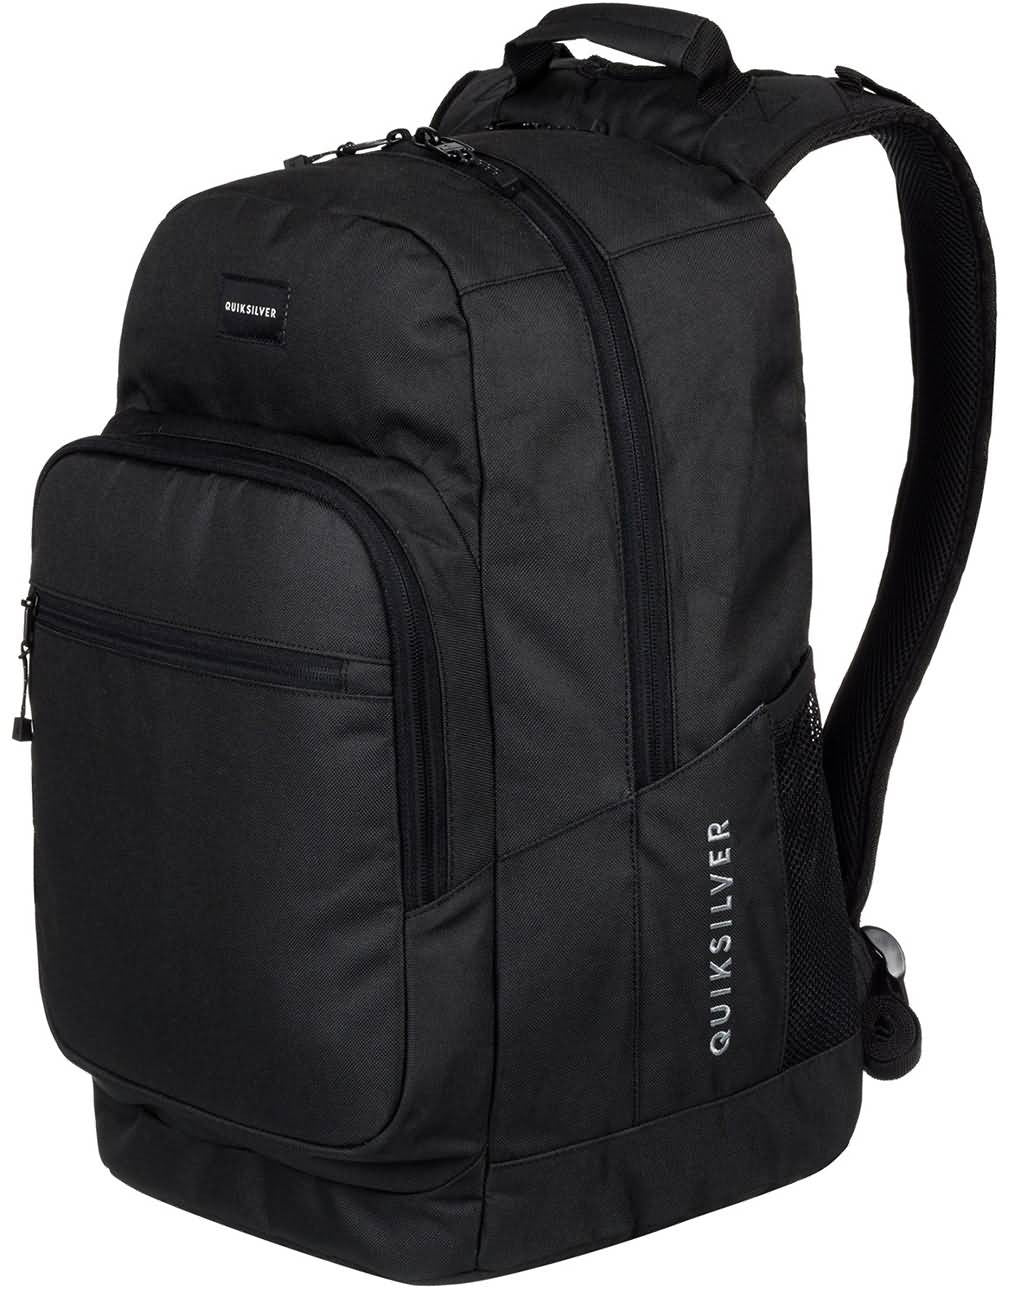 Quiksilver Surf Fall 2017 Accessories | Beach & Travel Backpacks Preview